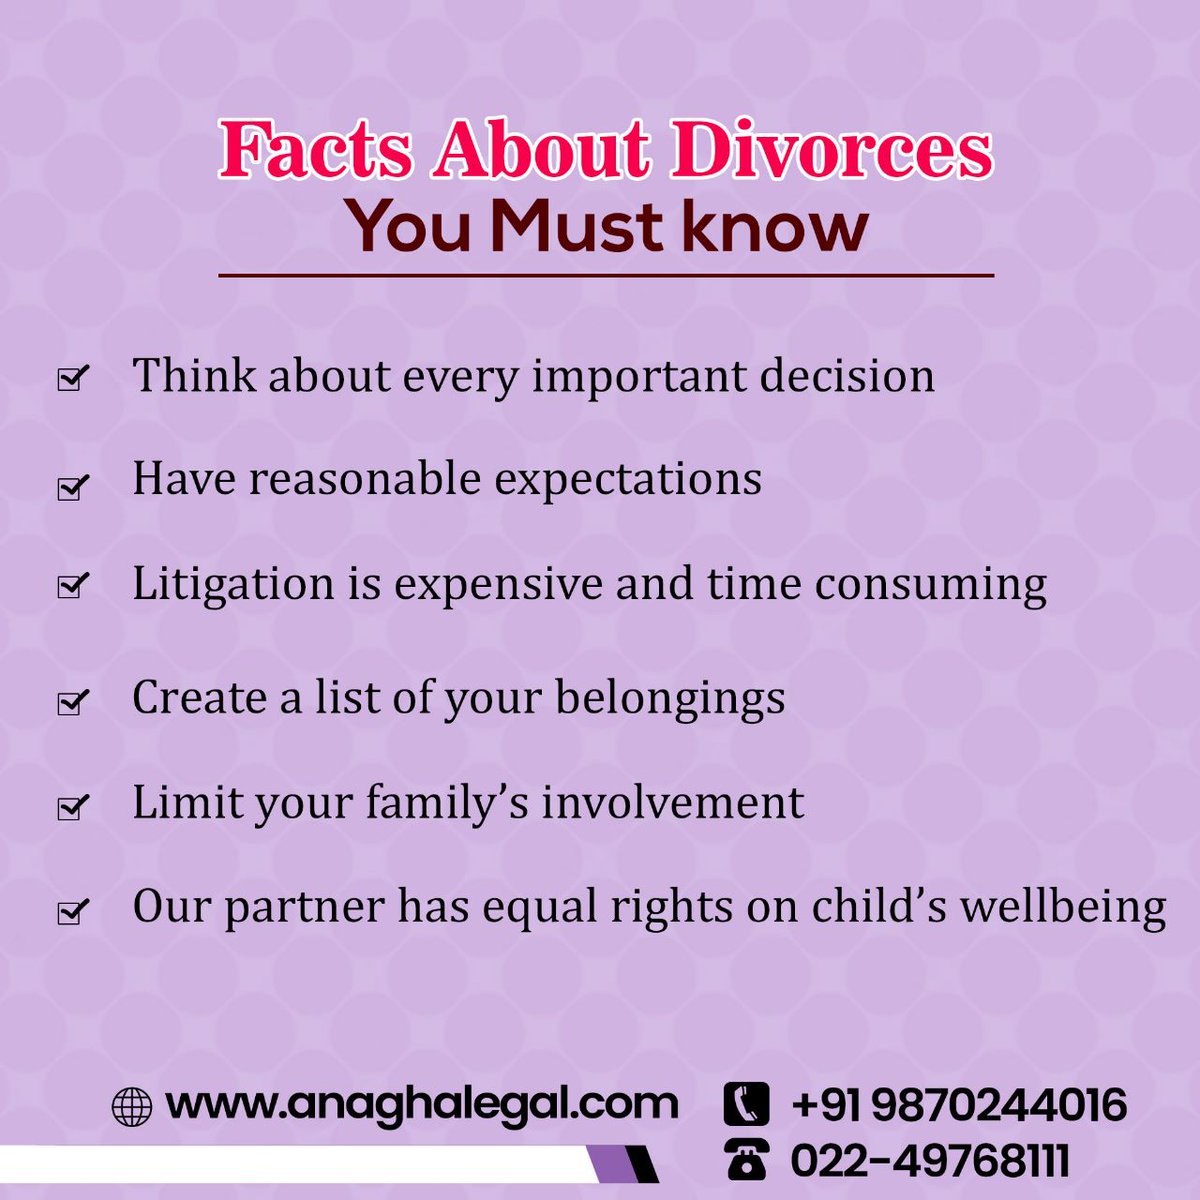 Divorce is a difficult and emotionally draining process, knowing the essential facts will help you navigate it more gracefully.

#anaghalegal #divorce #divorceconsultant #nridivorcelaws  #nrimarriage #divorcefacts #factstoknow #contactnow